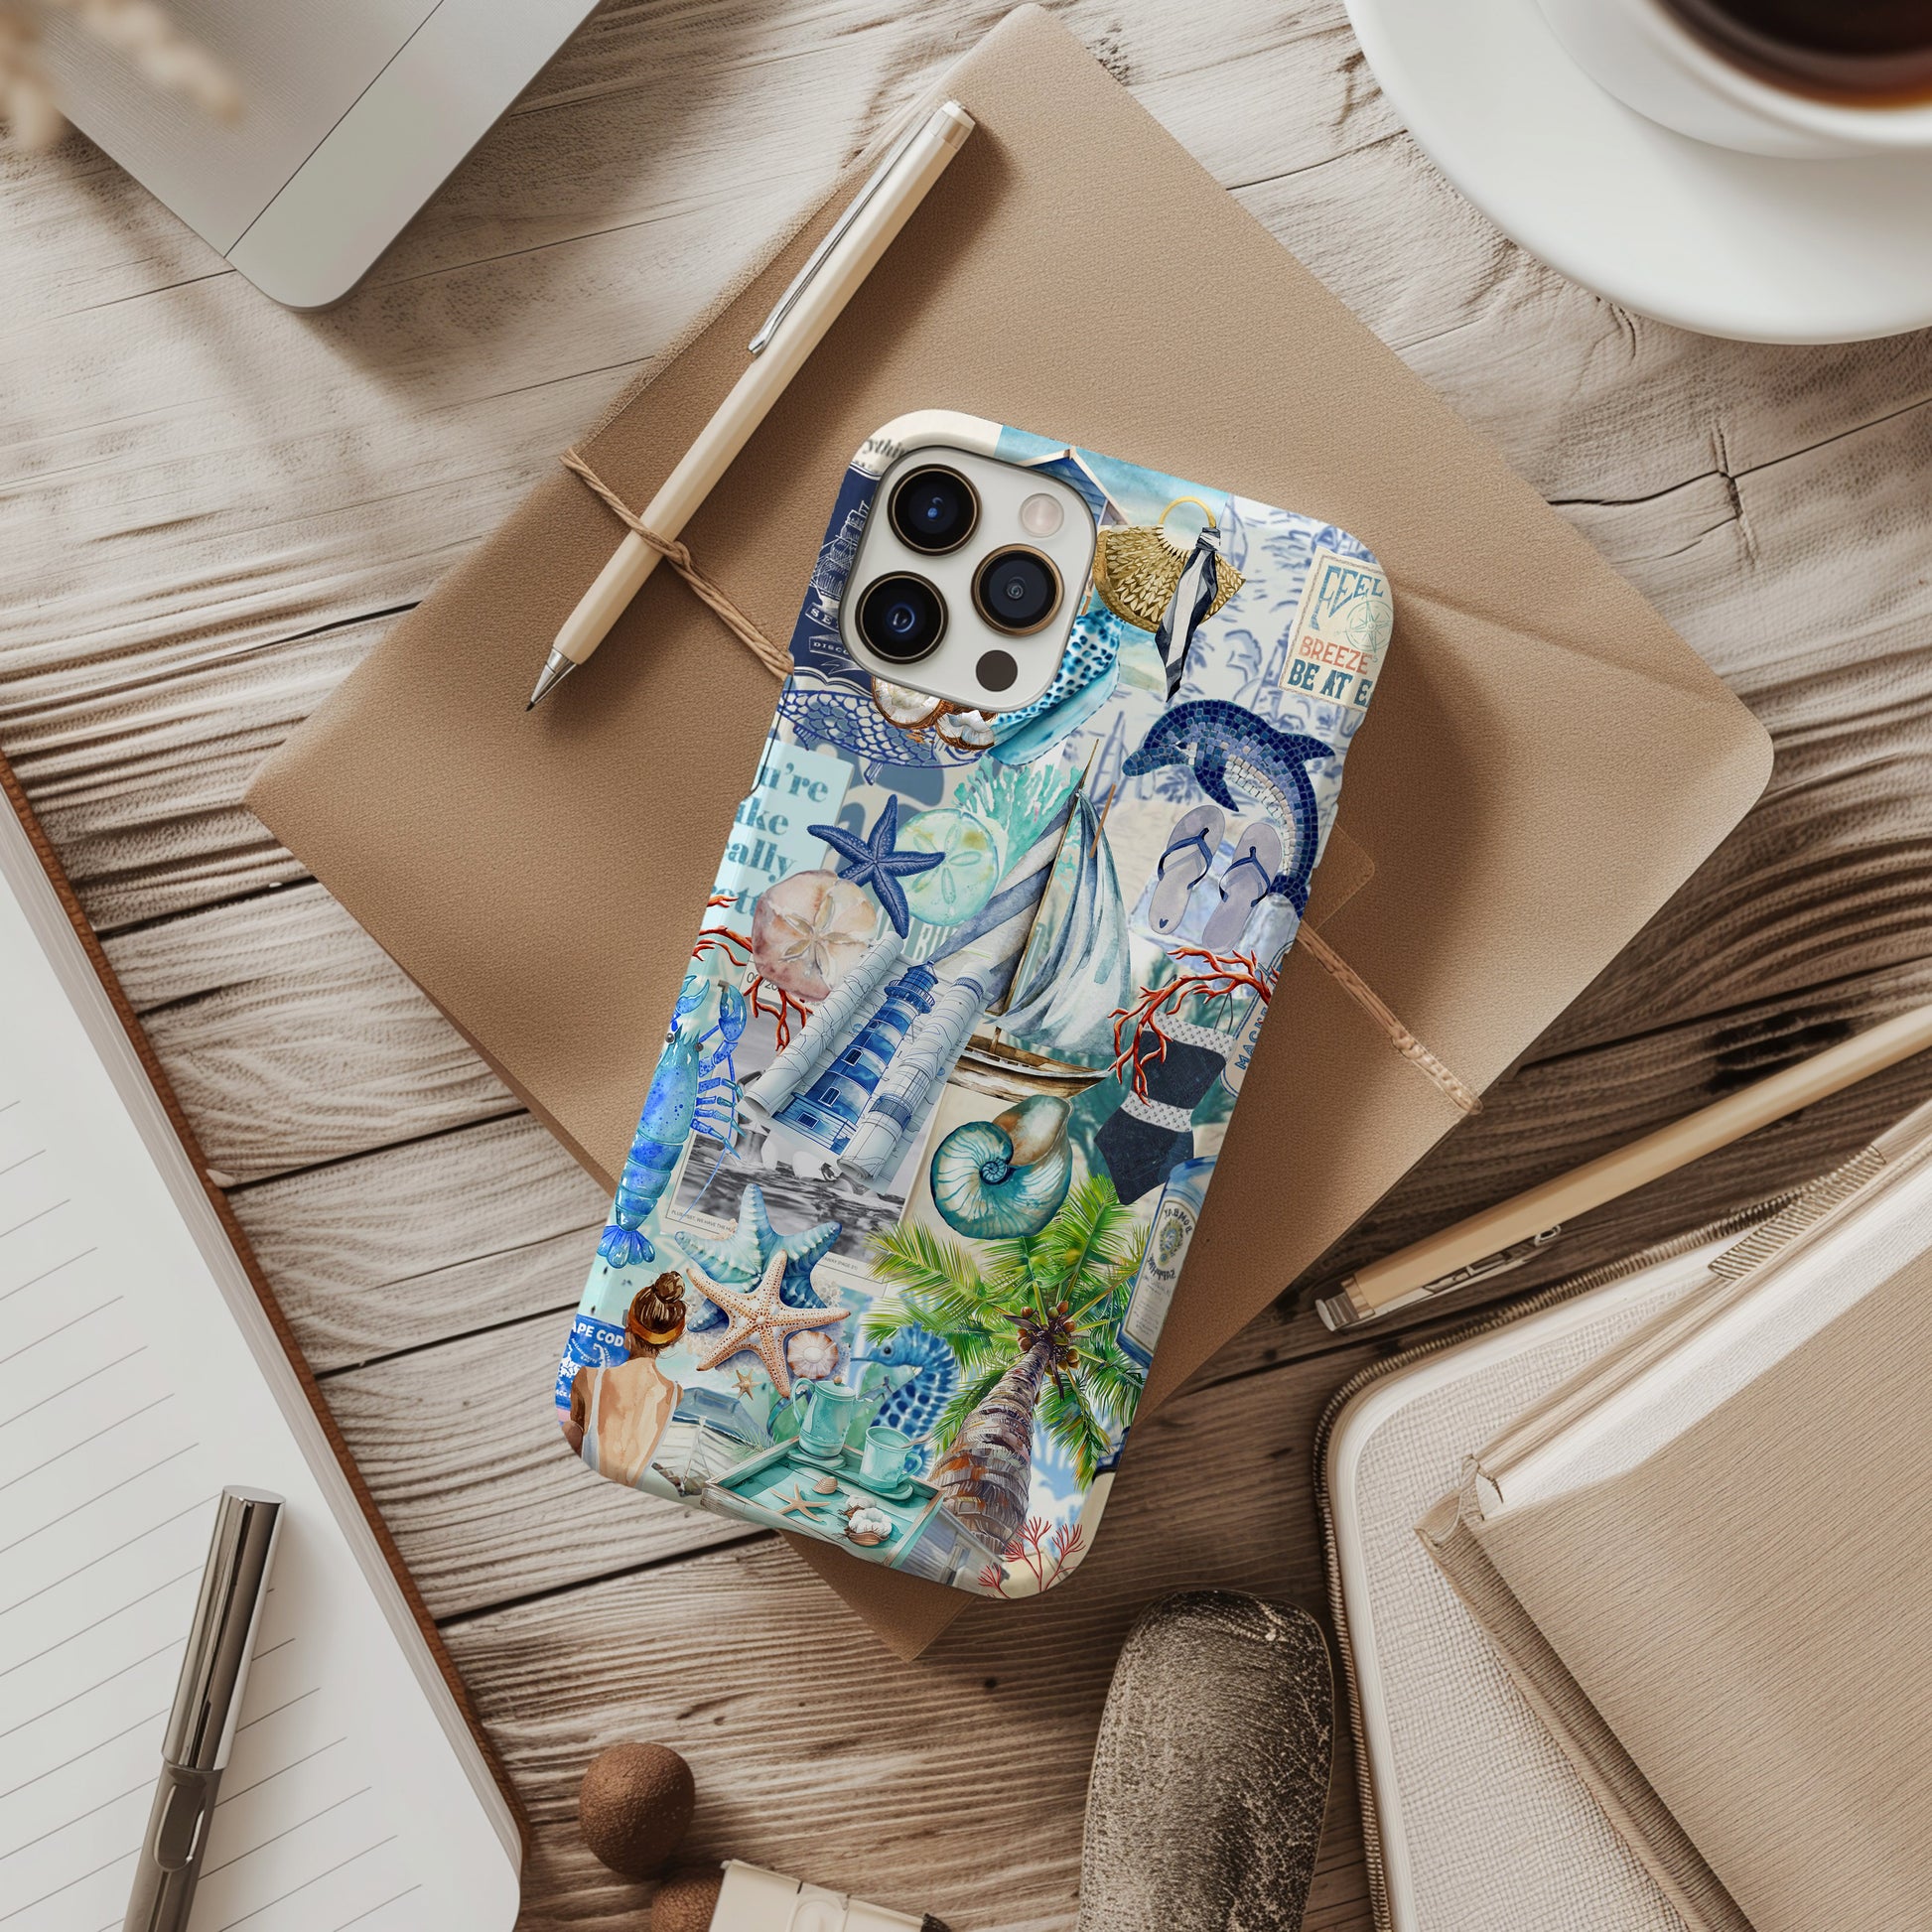 desk view Cape Cod Beach Collage Phone Case. Sand and Sea Phone Case for iPhone and Samsung Galaxy. Sailing and beach themed phone case by Artscape Market